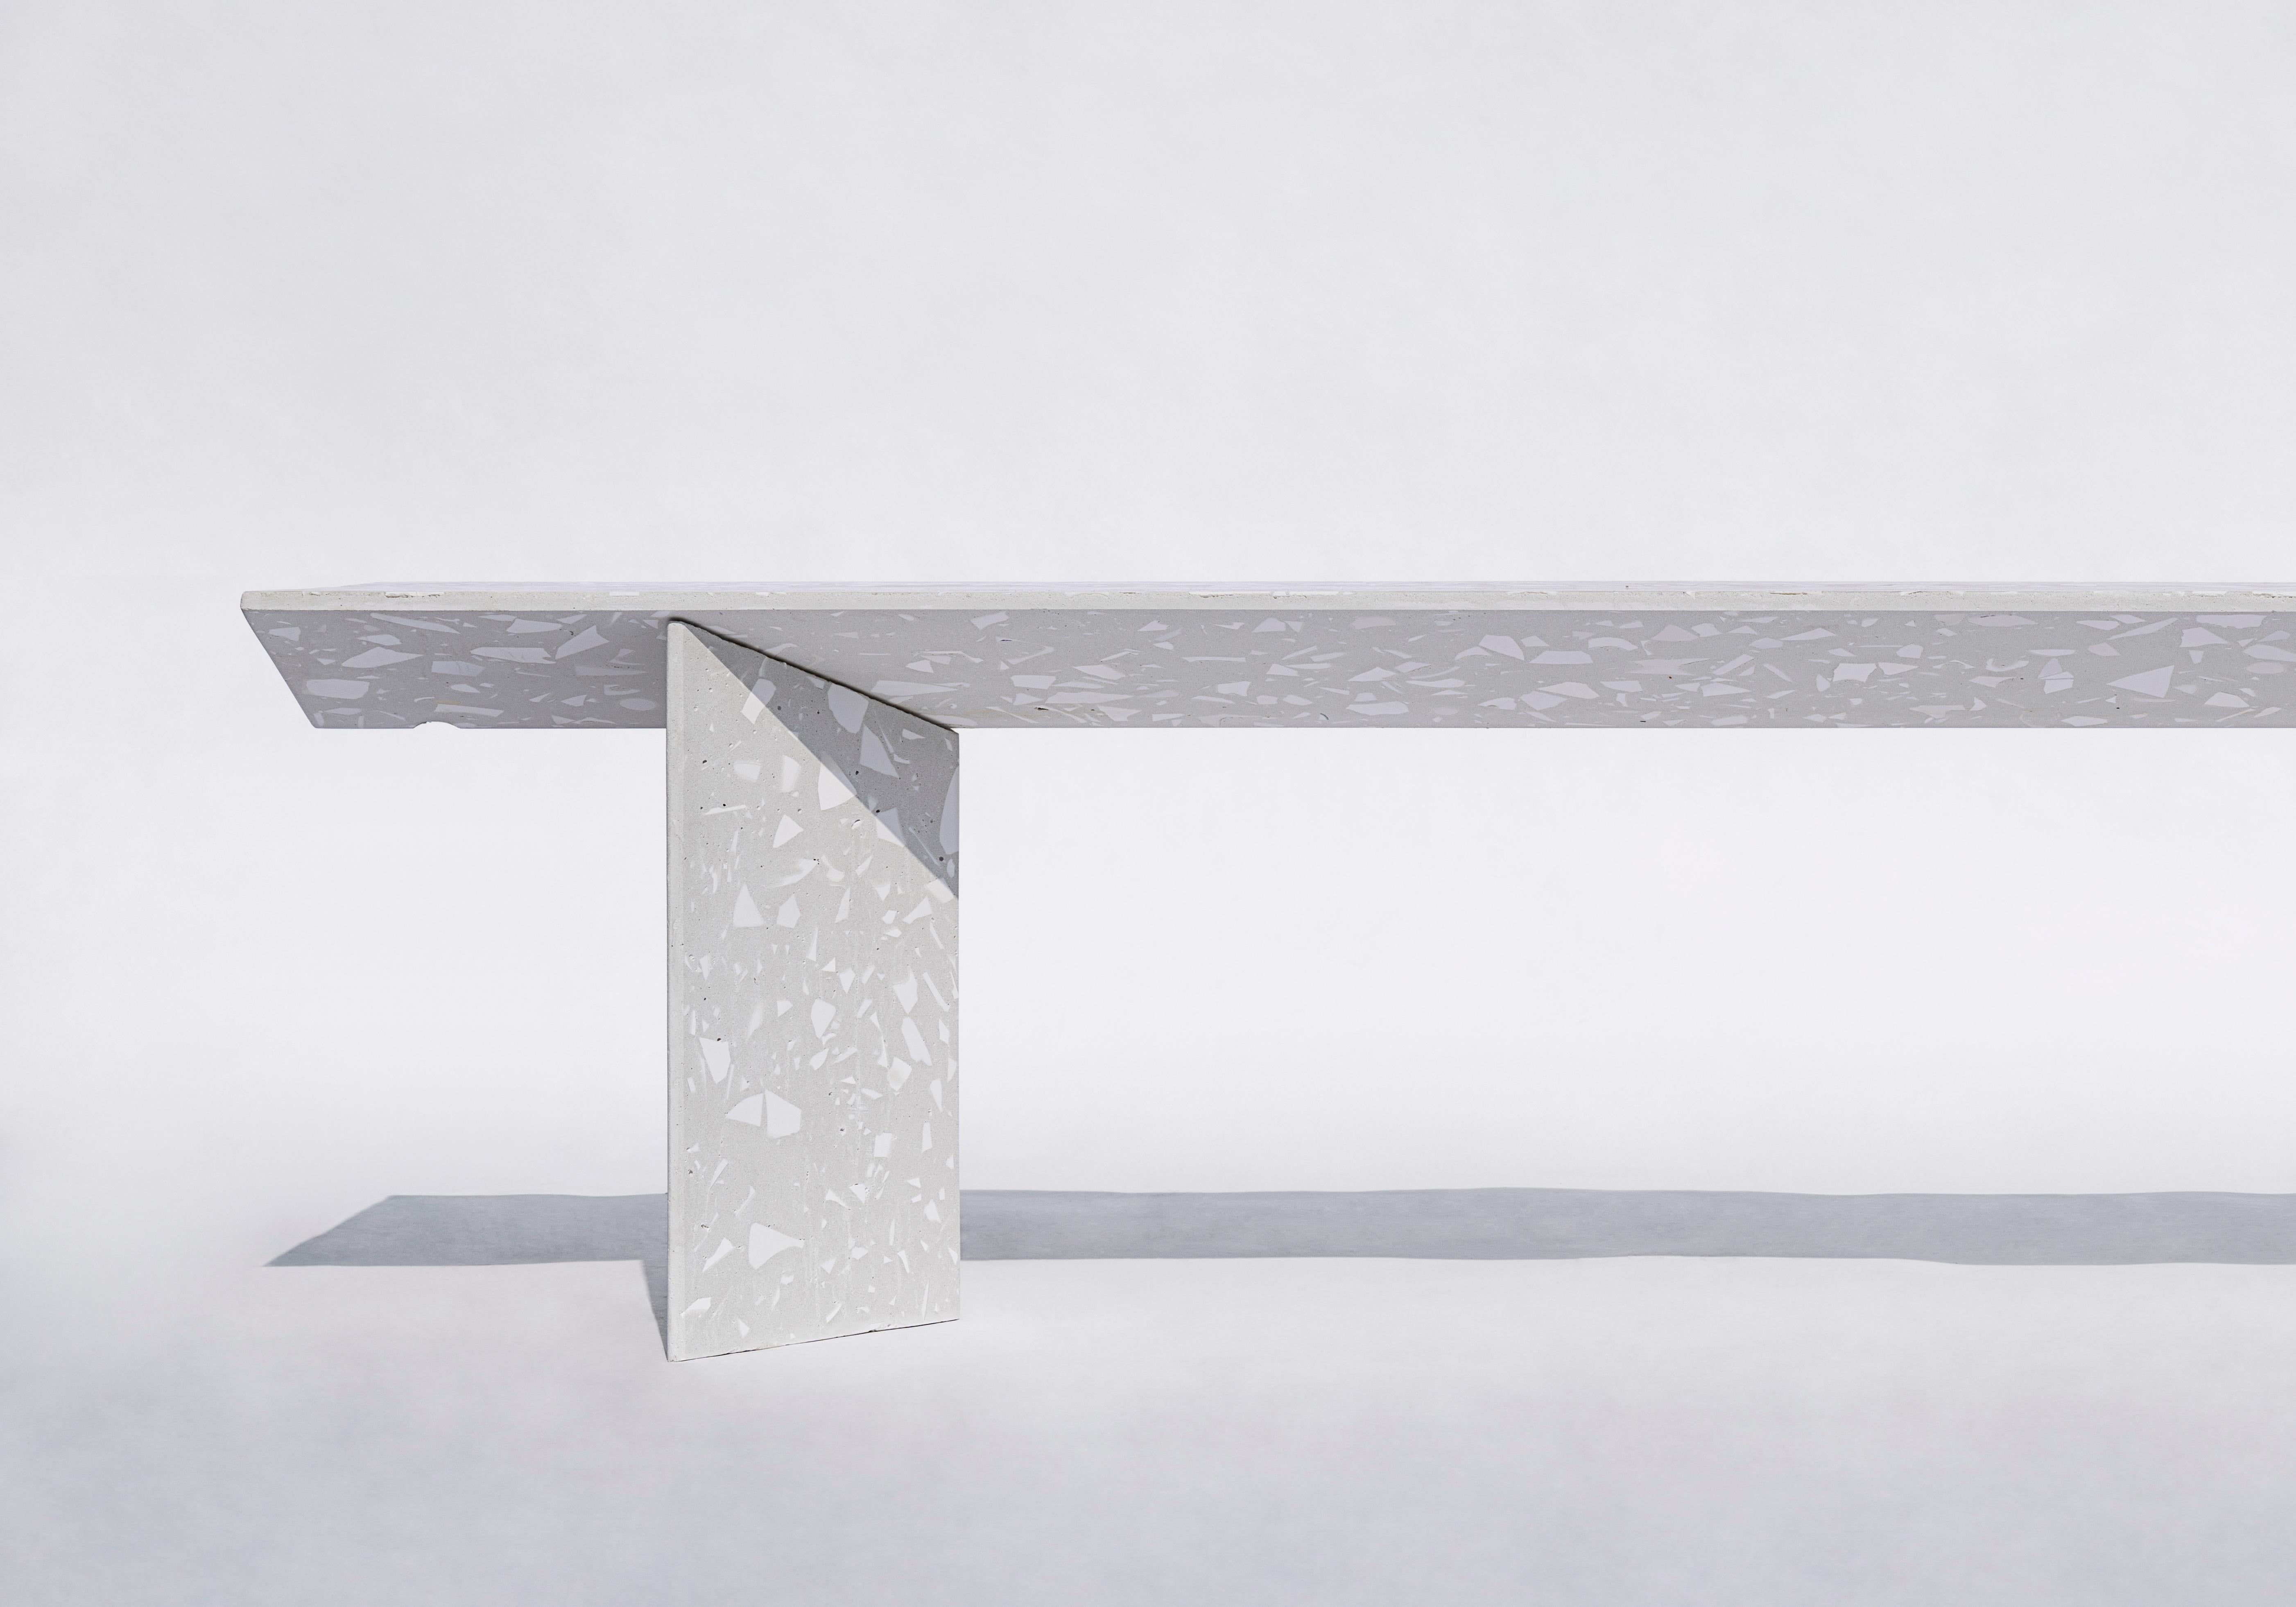 LIANG 1 Bench by Bentu Design

Concrete and ceramic waste / Terrazzo
2000×400×445 mm 
140 kg
Outdoor use: OK

--
Bentu Desing is a Guangzhou-based experimental design studio that explores concepts of product, space and environment through